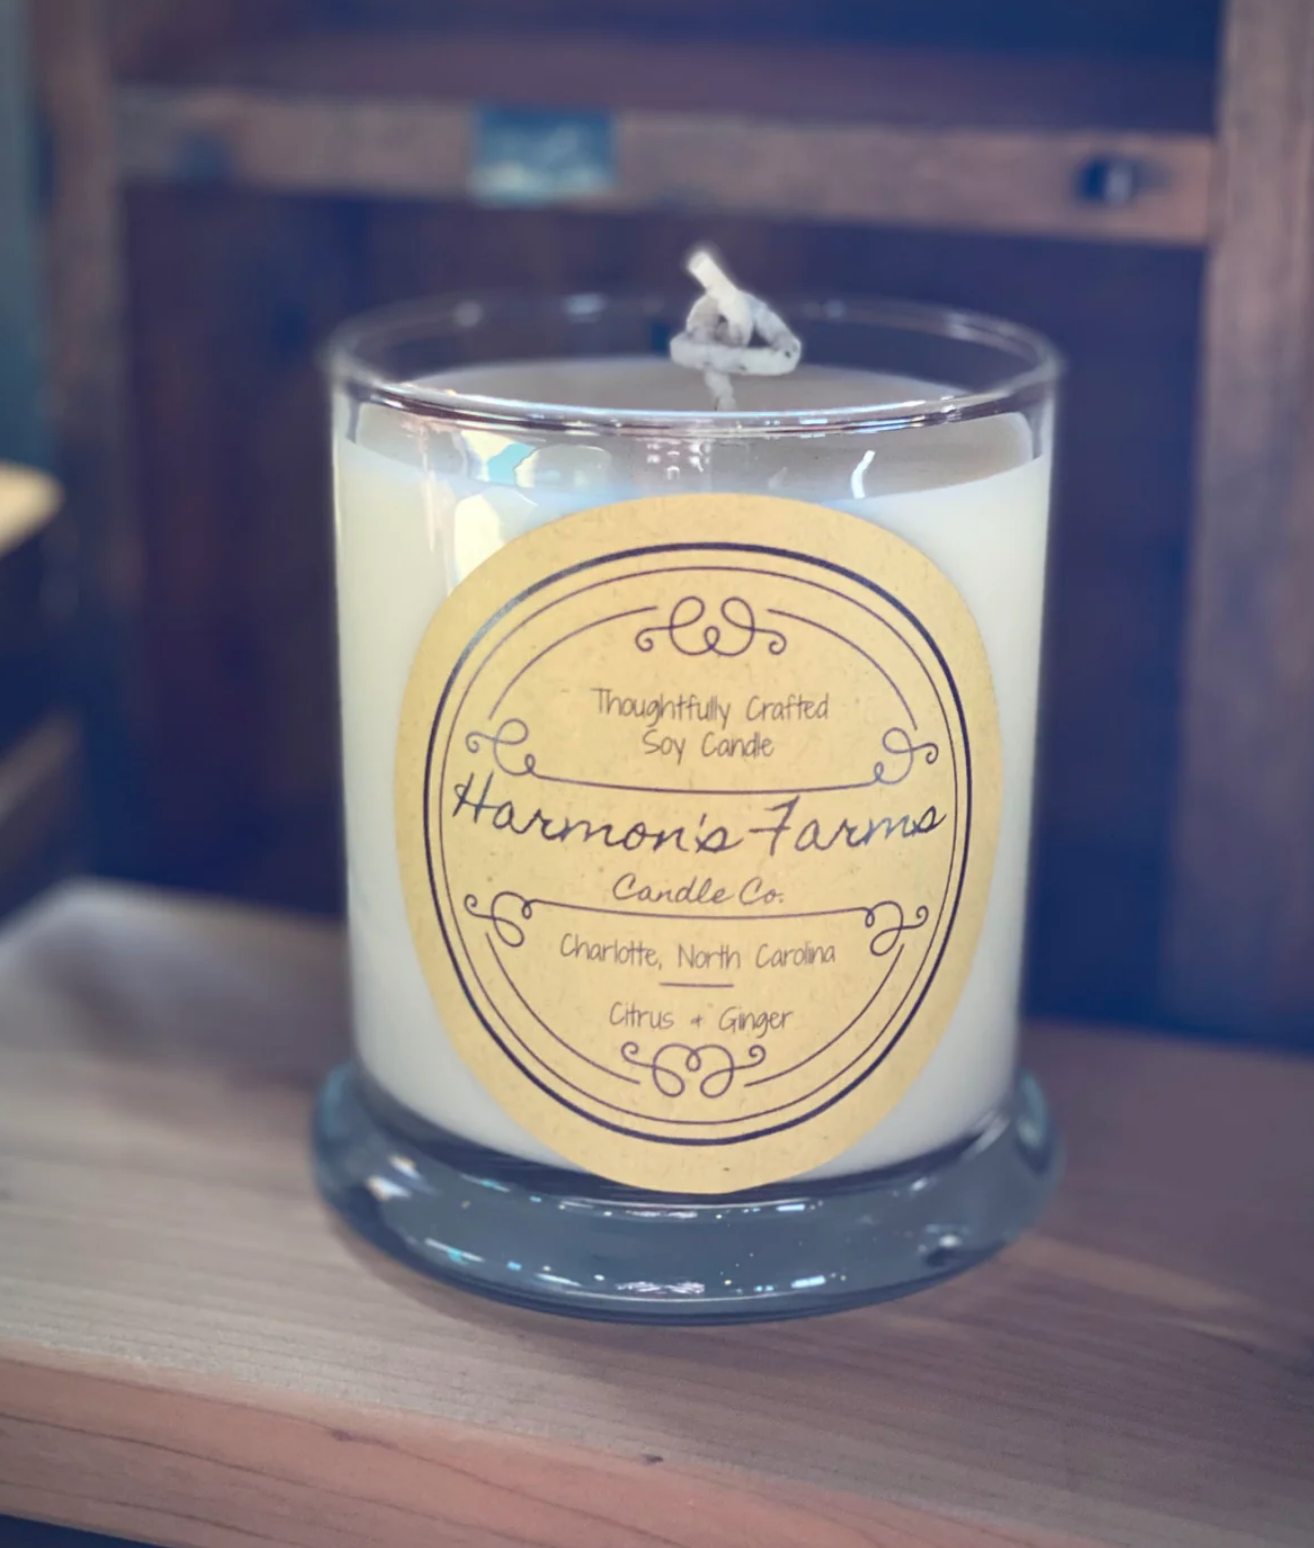 Harmon’s Farms Candle Co. Single Wick Candles